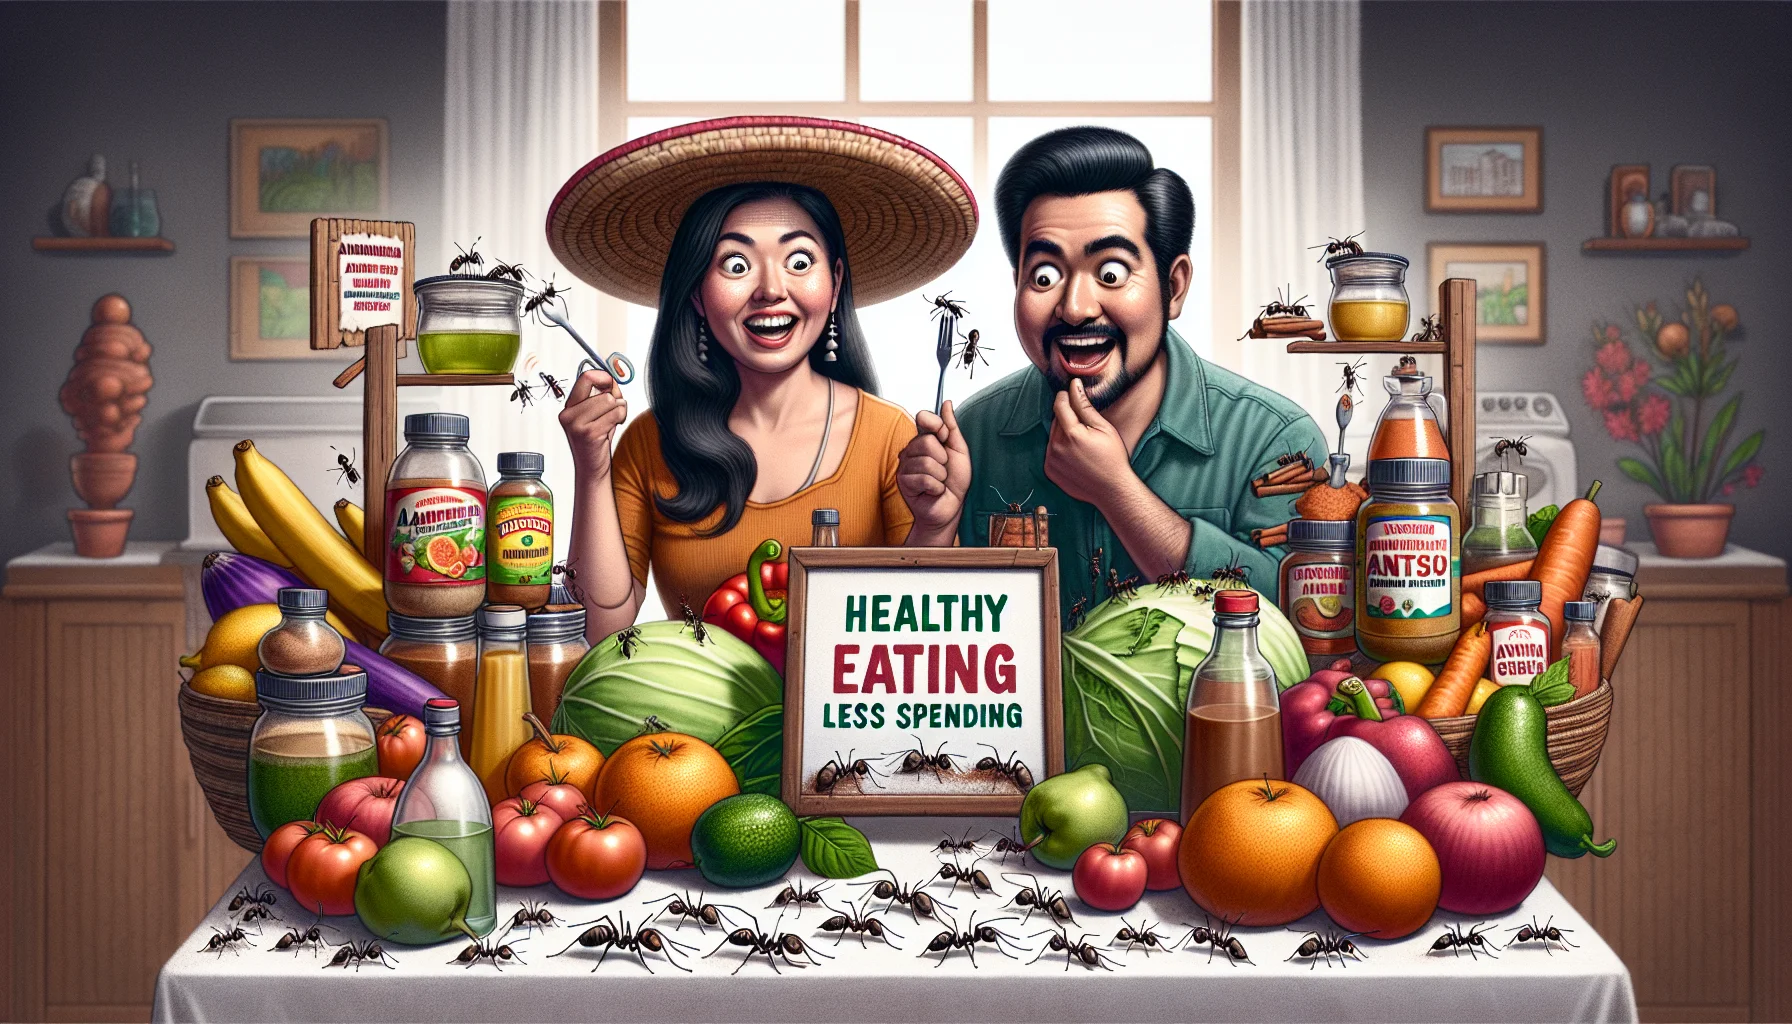 Envision a humorous scene depicting natural ant removal methods. This scene includes an array of fruits and vegetables arranged in an alluring way to encourage healthy eating habits. In the center, two individuals, a South Asian male and a Hispanic female, are ingeniously using household items such as vinegar and cinnamon to deter an army of ants. The facial expressions of the characters convey surprise and amusement, making the scene laughable. To emphasize affordability, a signboard is added to the scene, displaying 'Healthy Eating, Less Spending.'